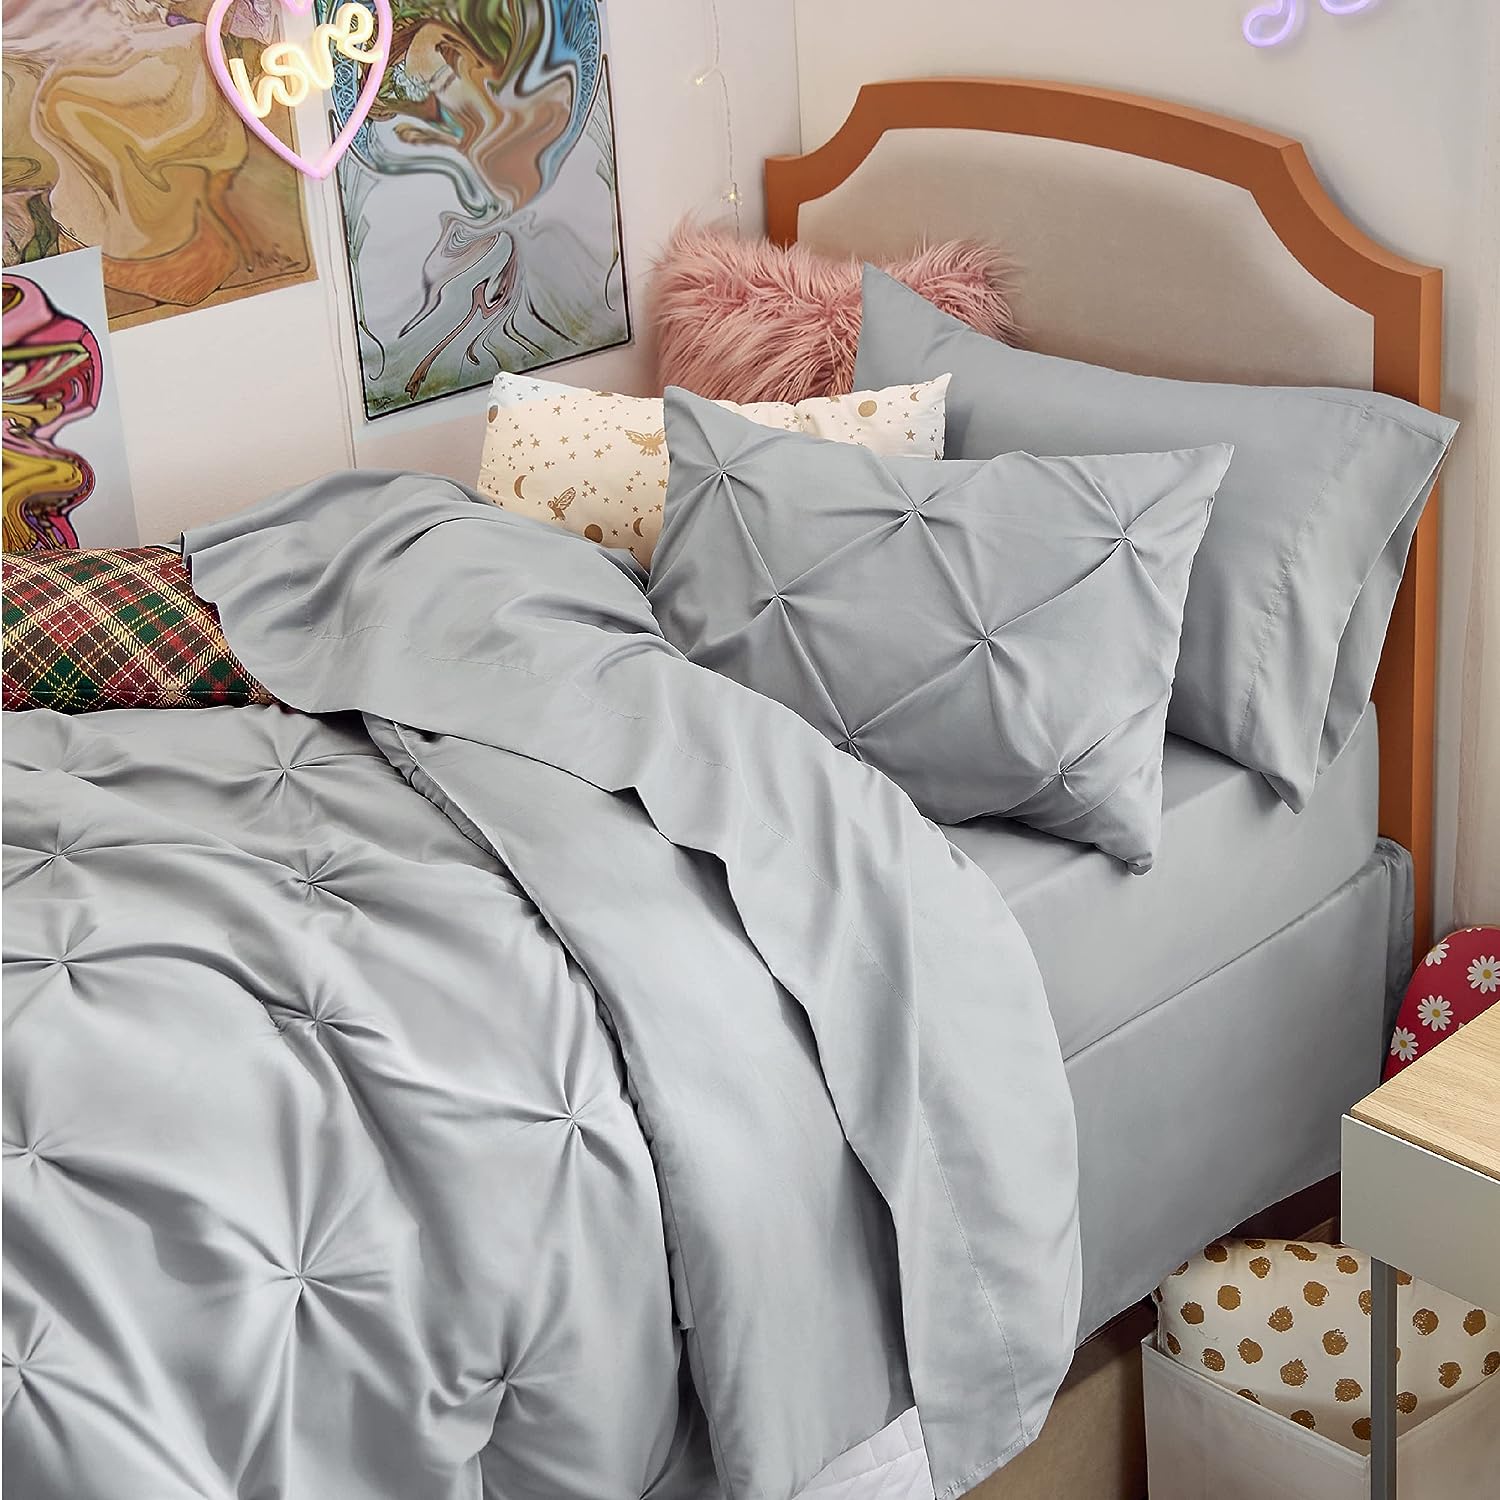  Bedsure Twin Comforter Set with Sheets - 5 Pieces Twin Bedding  Sets, Pinch Pleat Grey Twin Bed in a Bag with Comforter, Sheets, Pillowcase  & Sham, Kids Bedding Set : Home